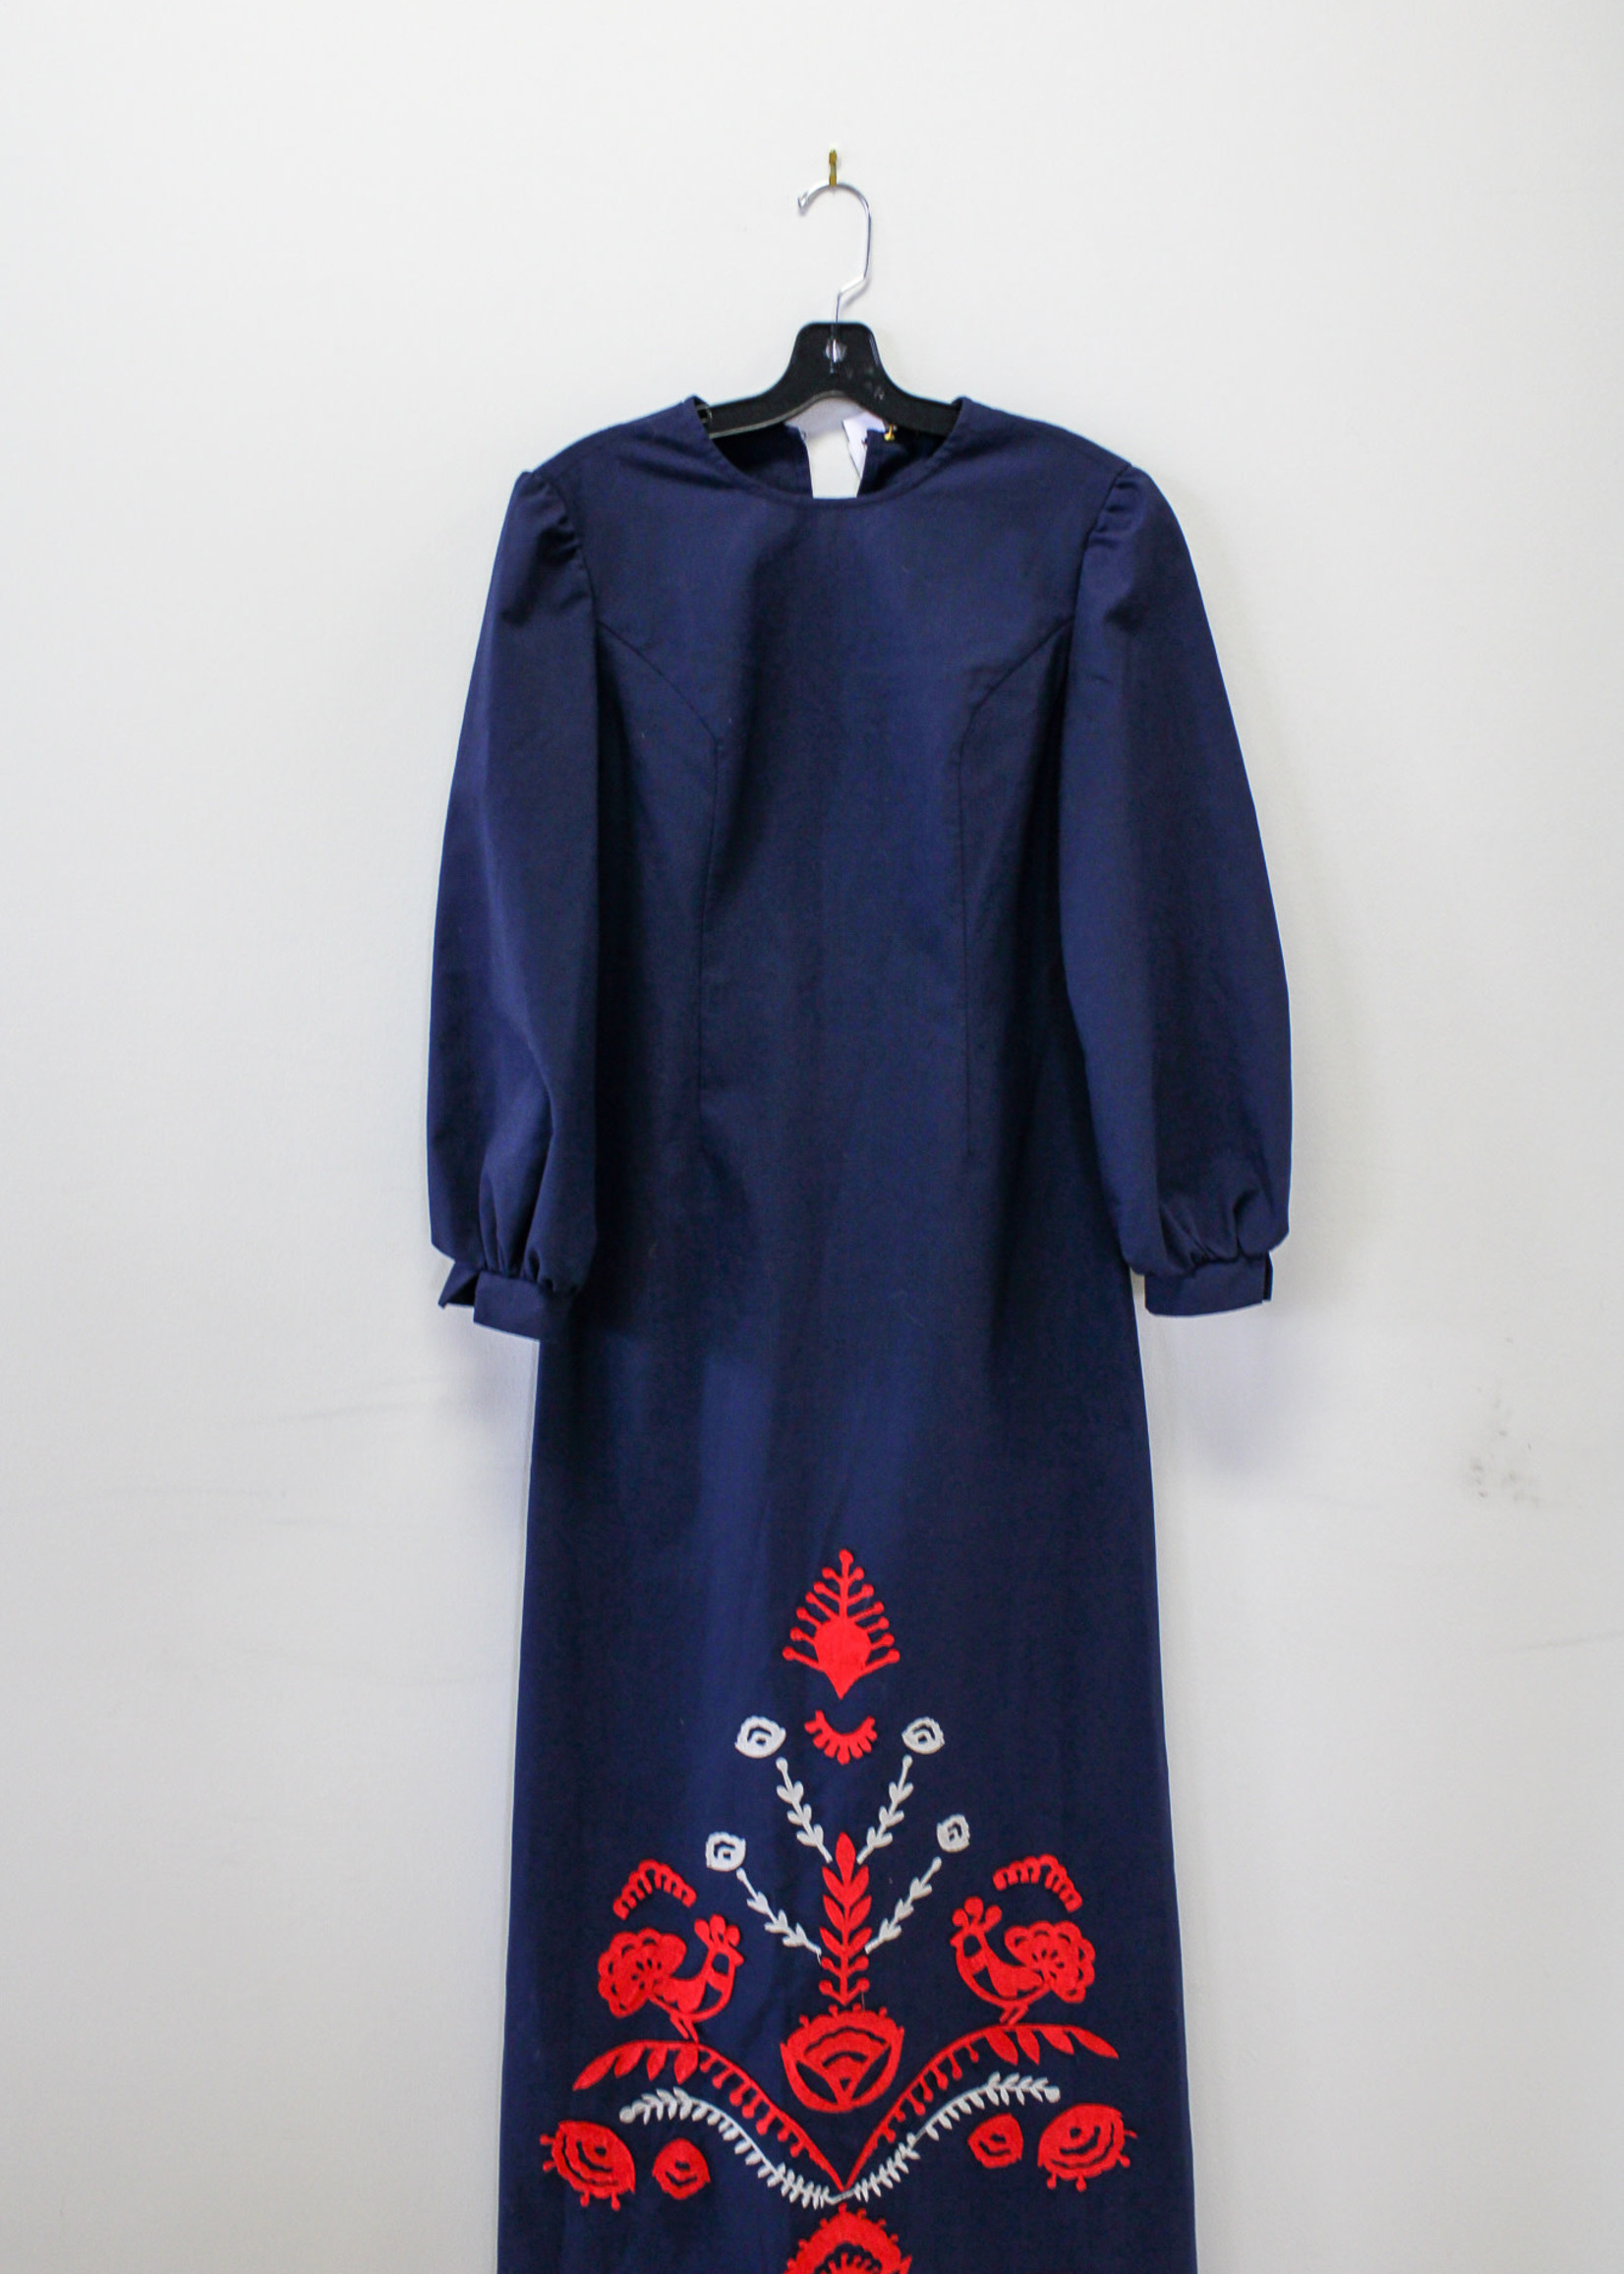 DRESS - Long Navy Blue with red and grey floral pattern (S)